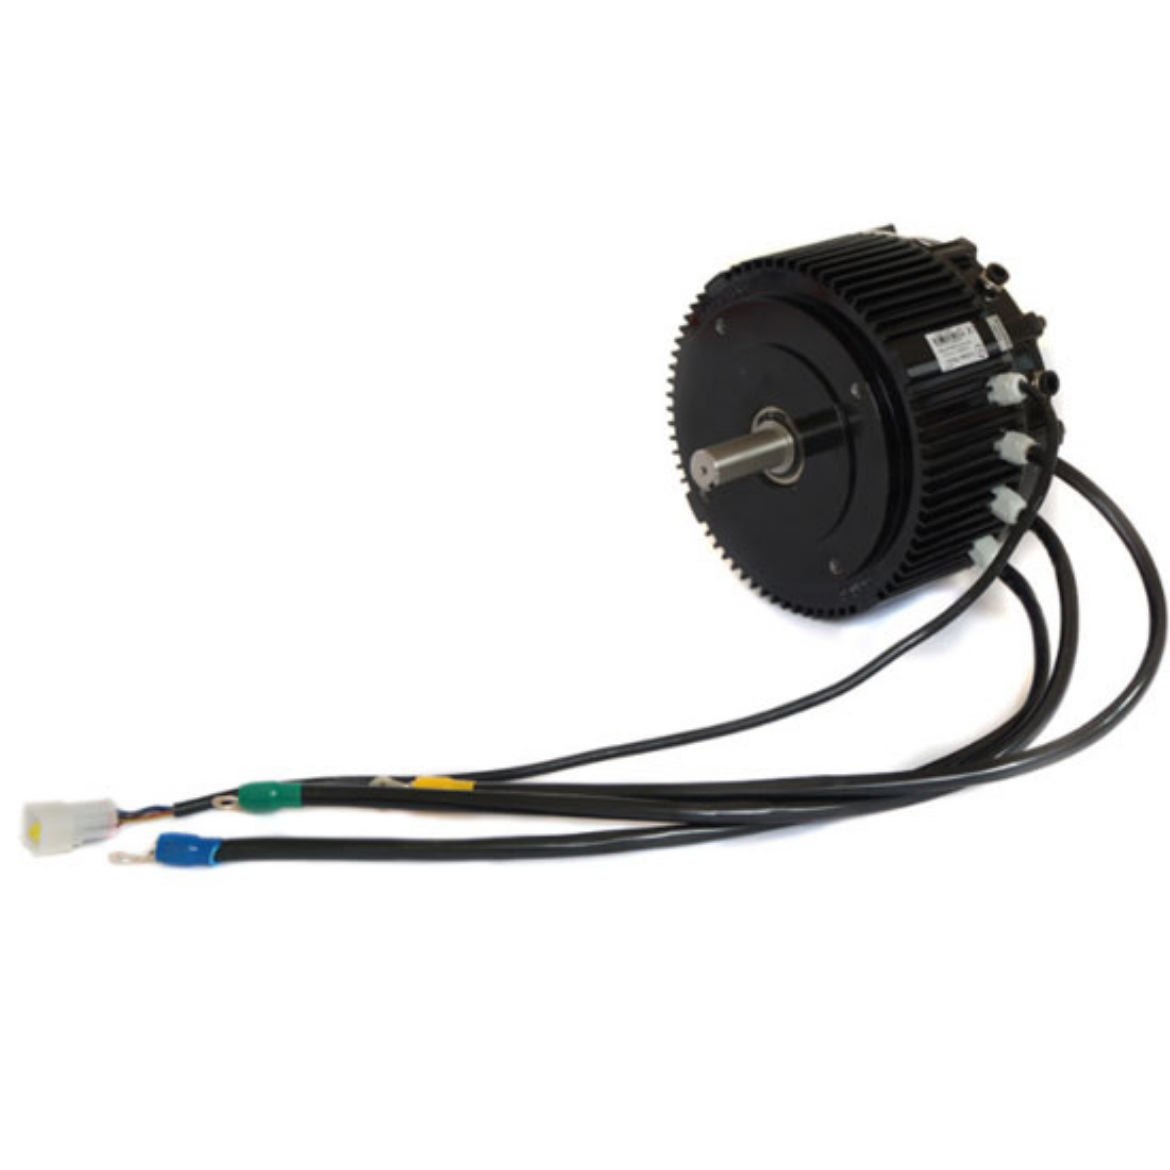 5kW BLDC Motor For Electric Vehicle, Water Cooling